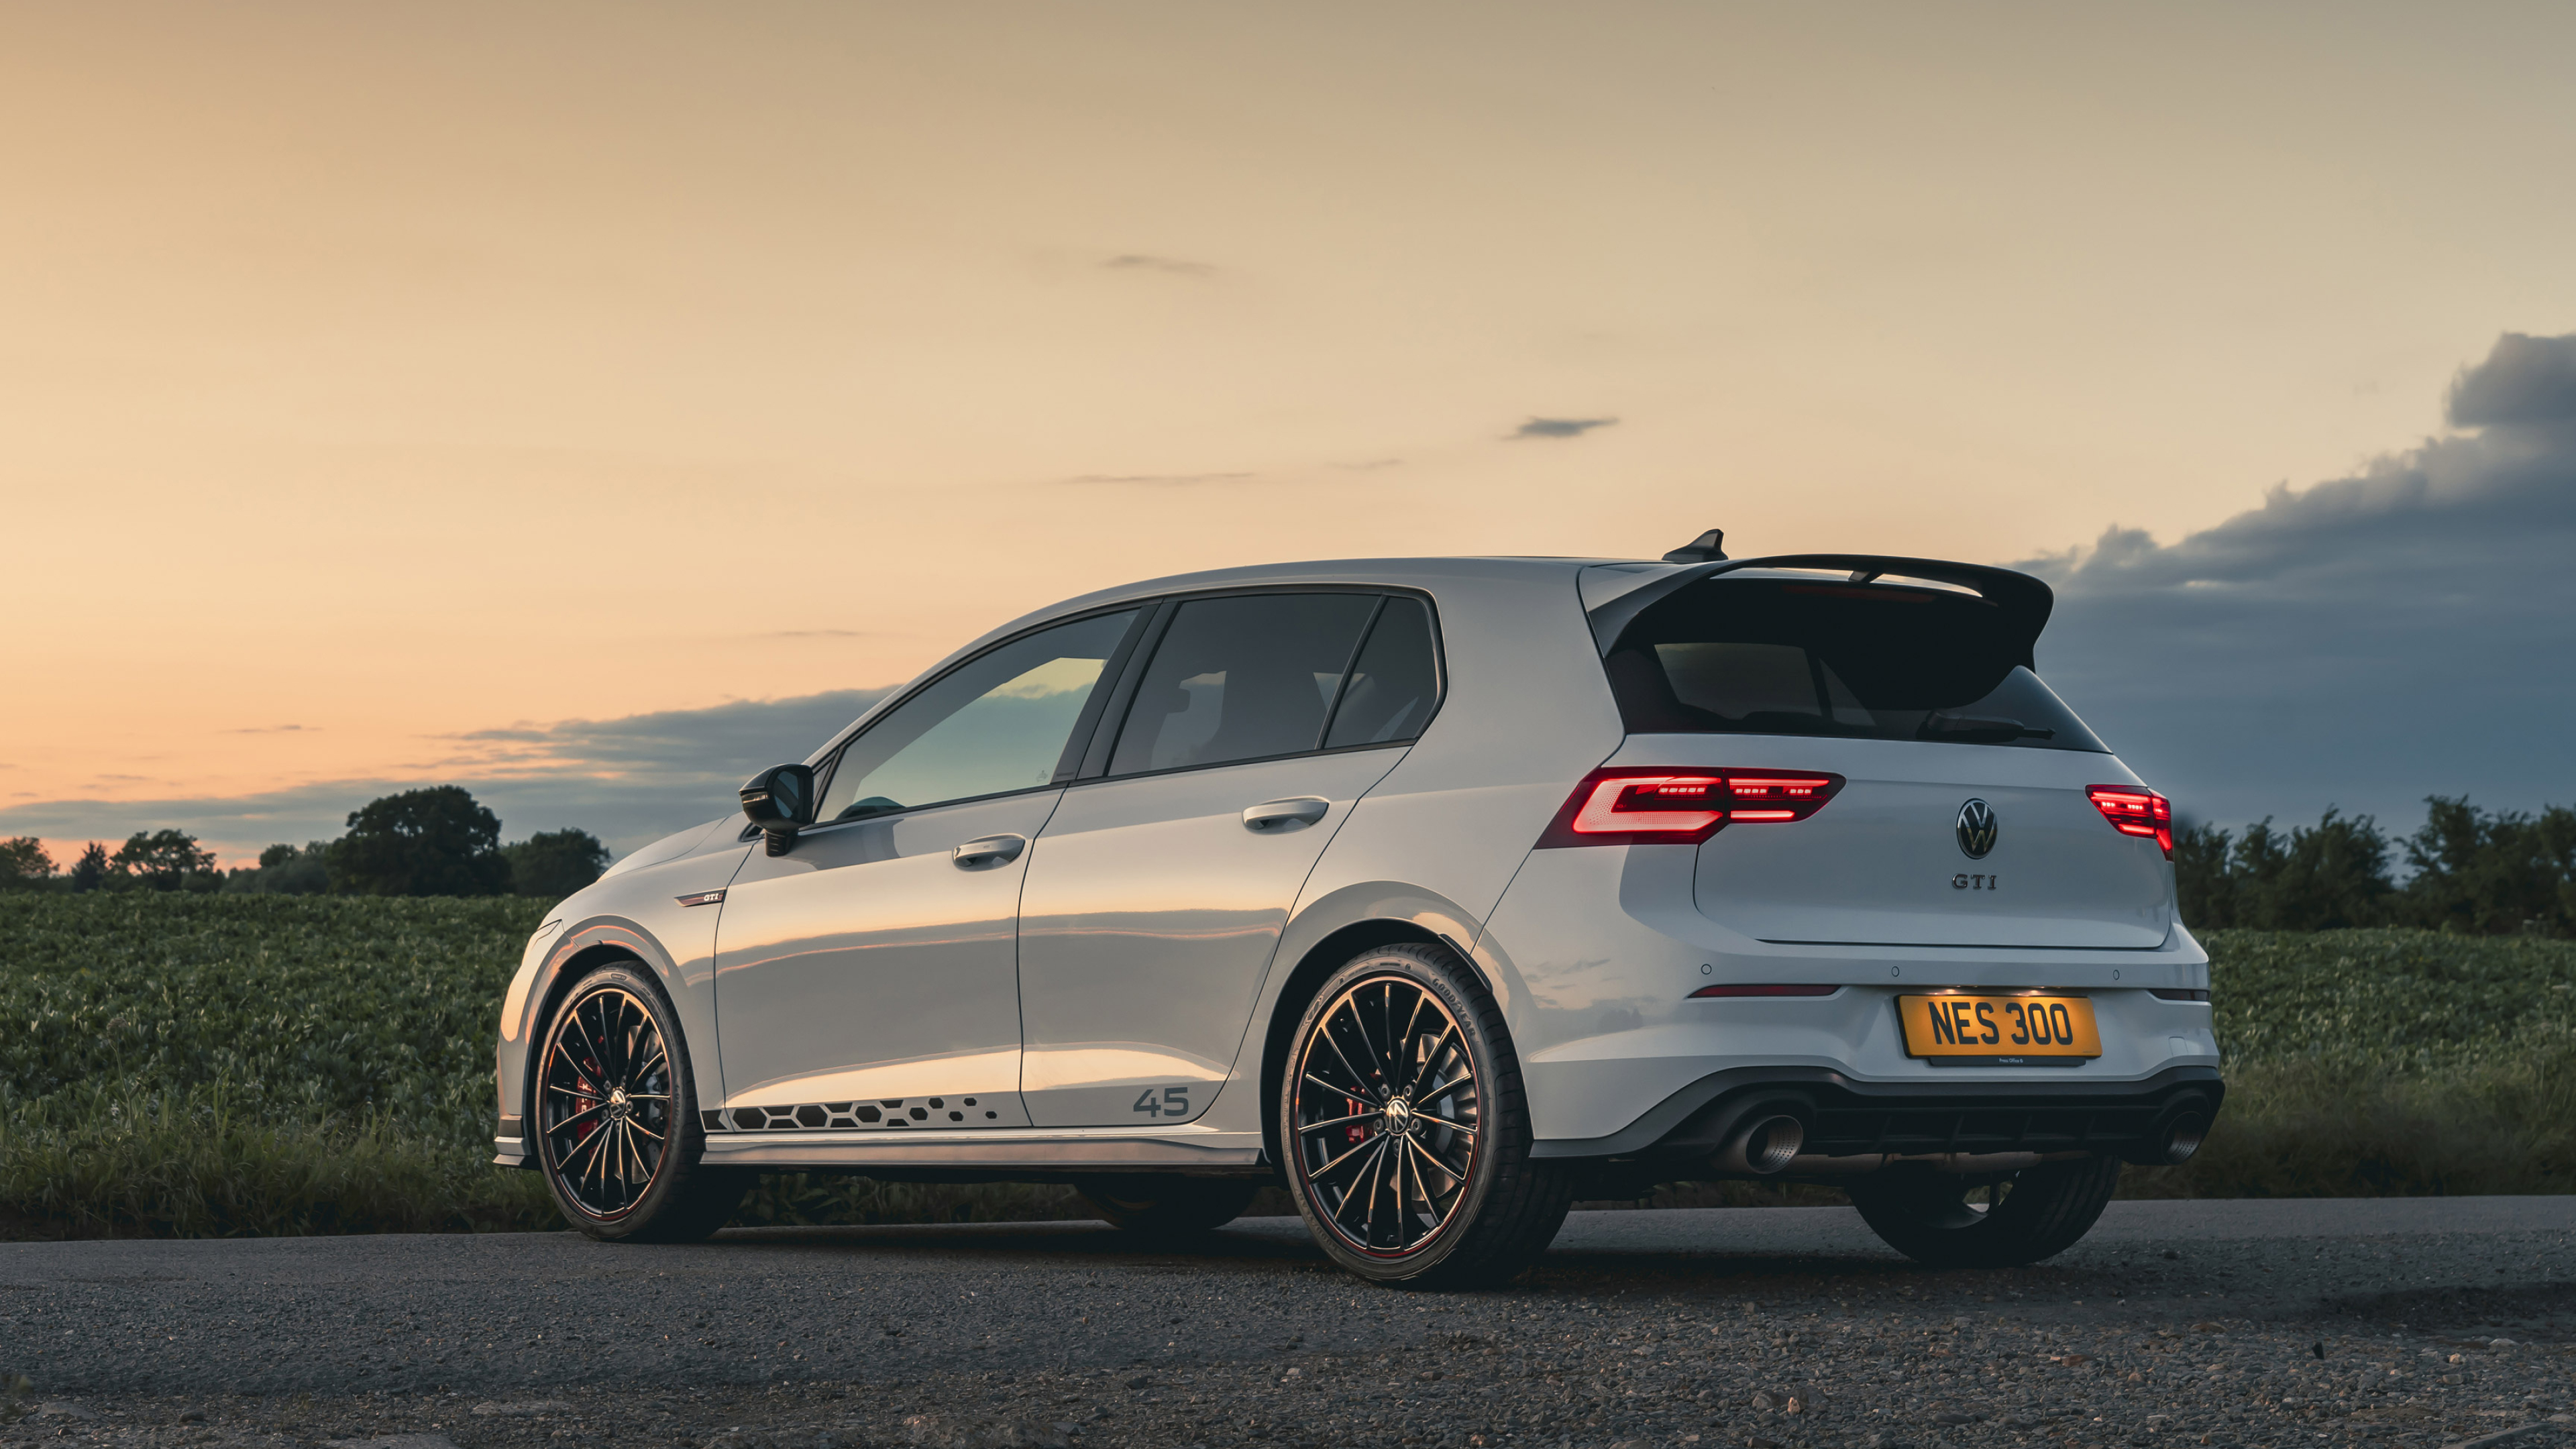 Golf GTI: 2021 Volkswagen Clubsport 45, Has spawed two variants: the GTE and GTD. 3840x2160 4K Background.